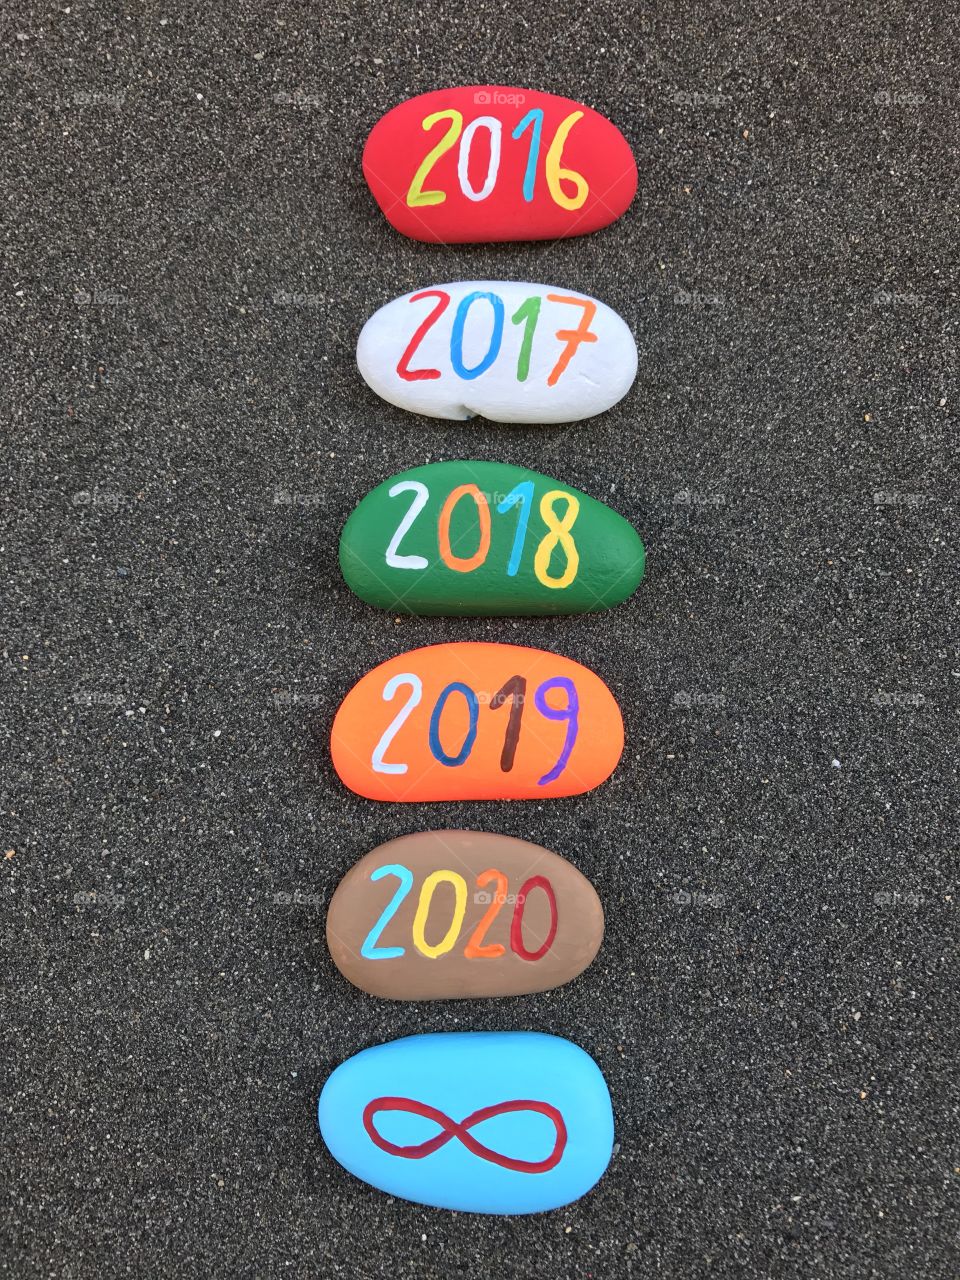 2016,2017,2018,2019,2020 year oncolored stones